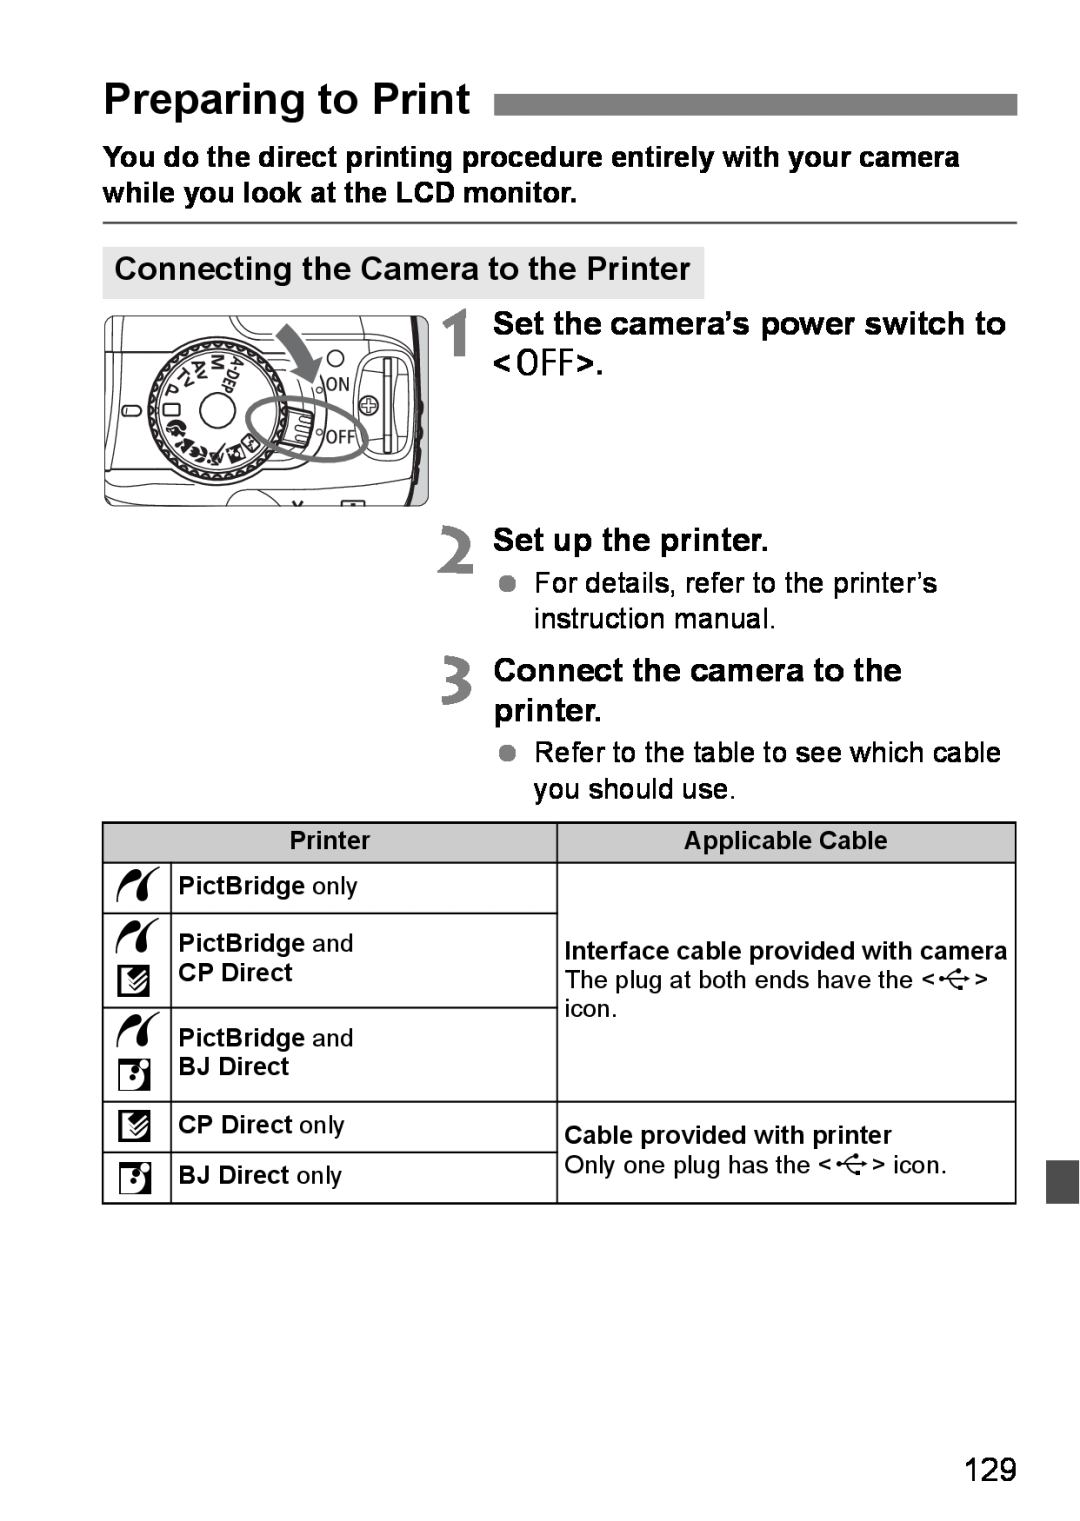 Canon EOS DIGITAL REBEL XTI Preparing to Print, Connecting the Camera to the Printer, Connectprinter. the camera to the 